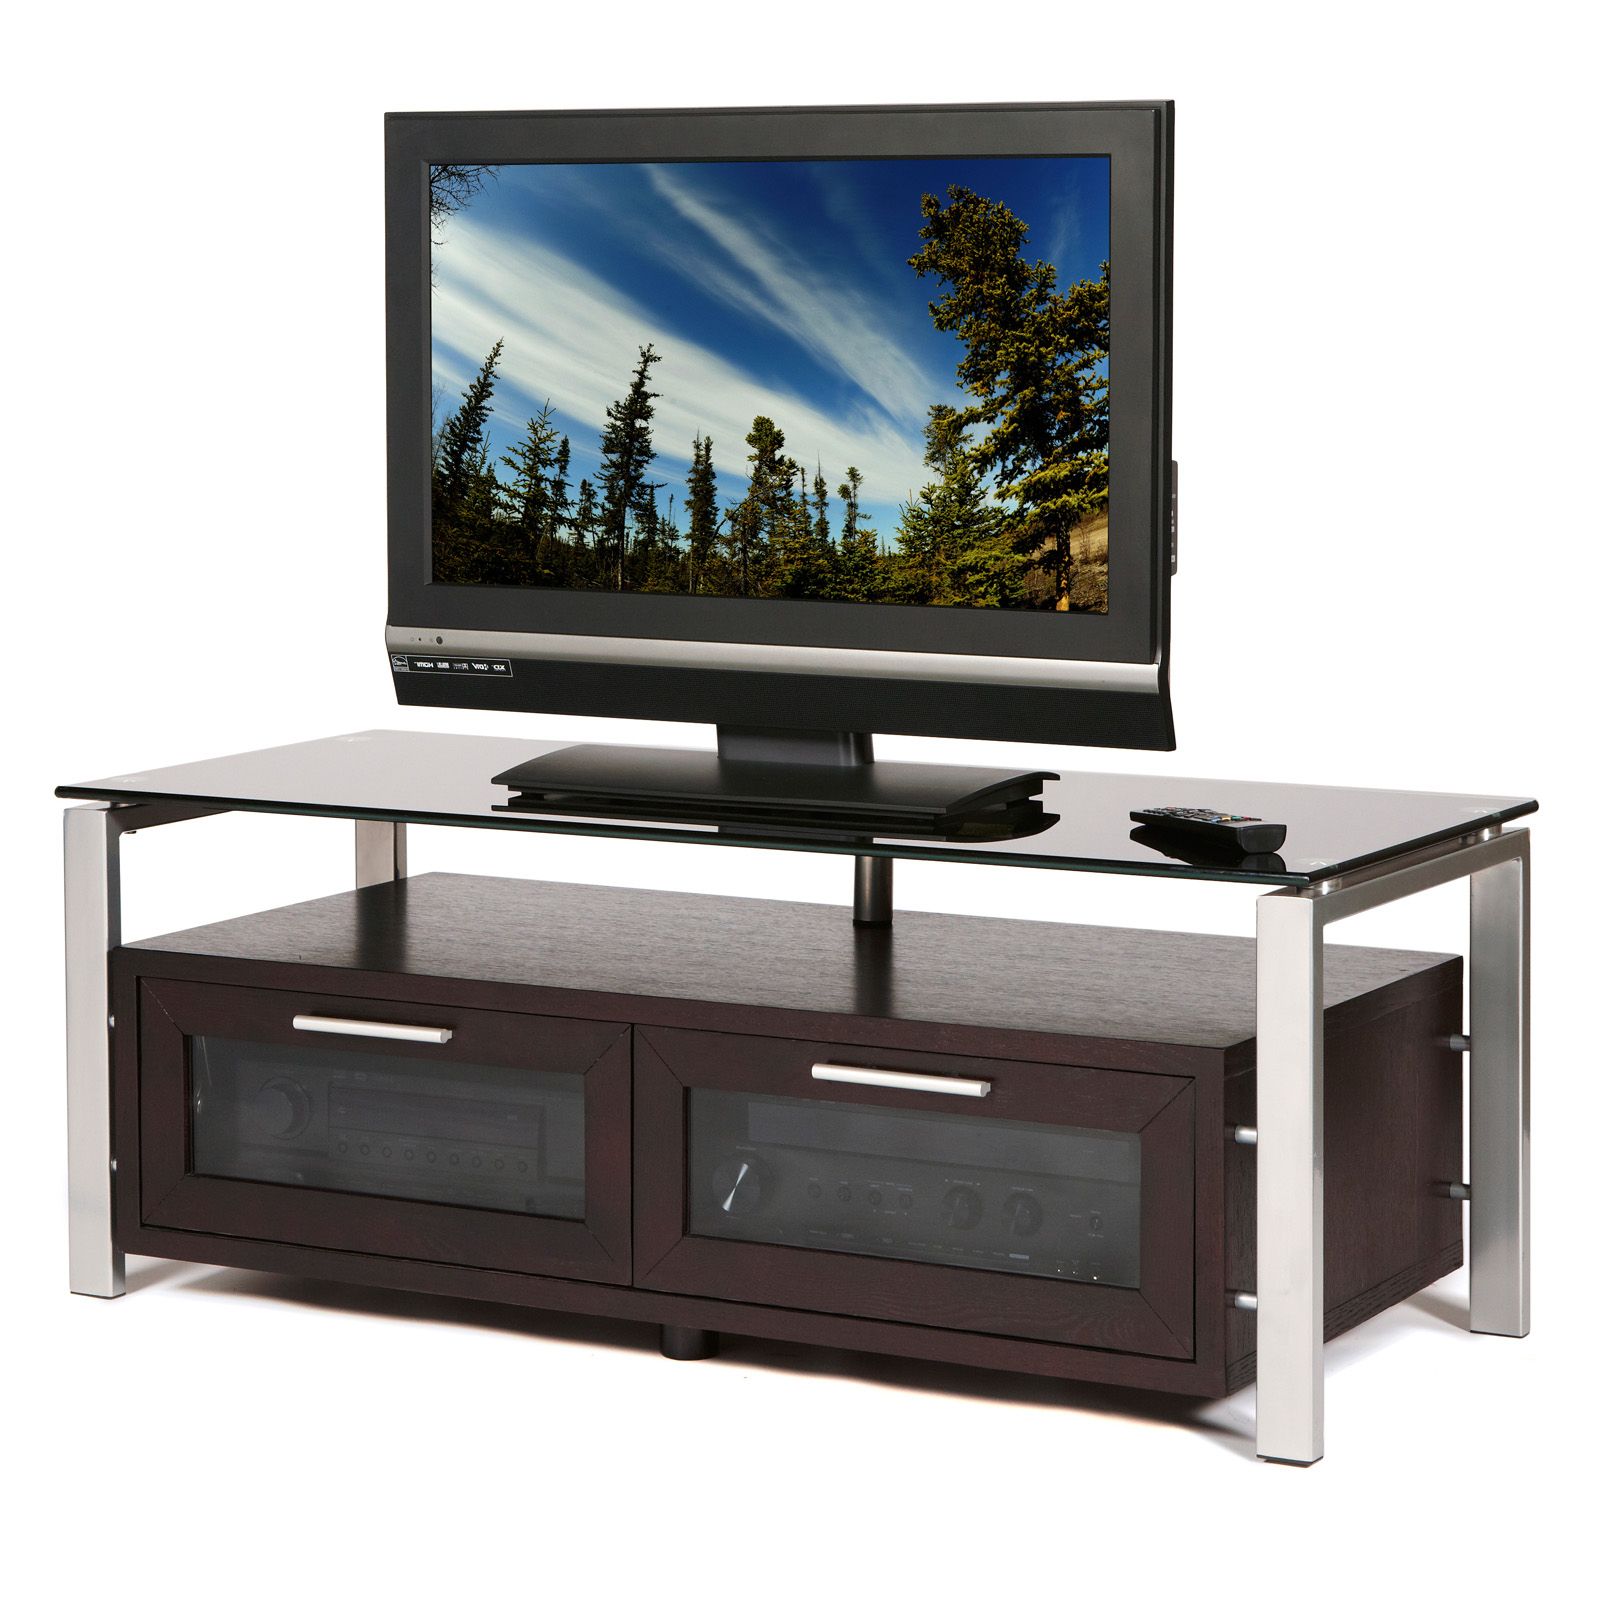 Plateau Decor 50 Inch Tv Stand In Espresso/black And Inside Well Liked Tv Stands Fwith Tv Mount Silver/black (View 3 of 10)